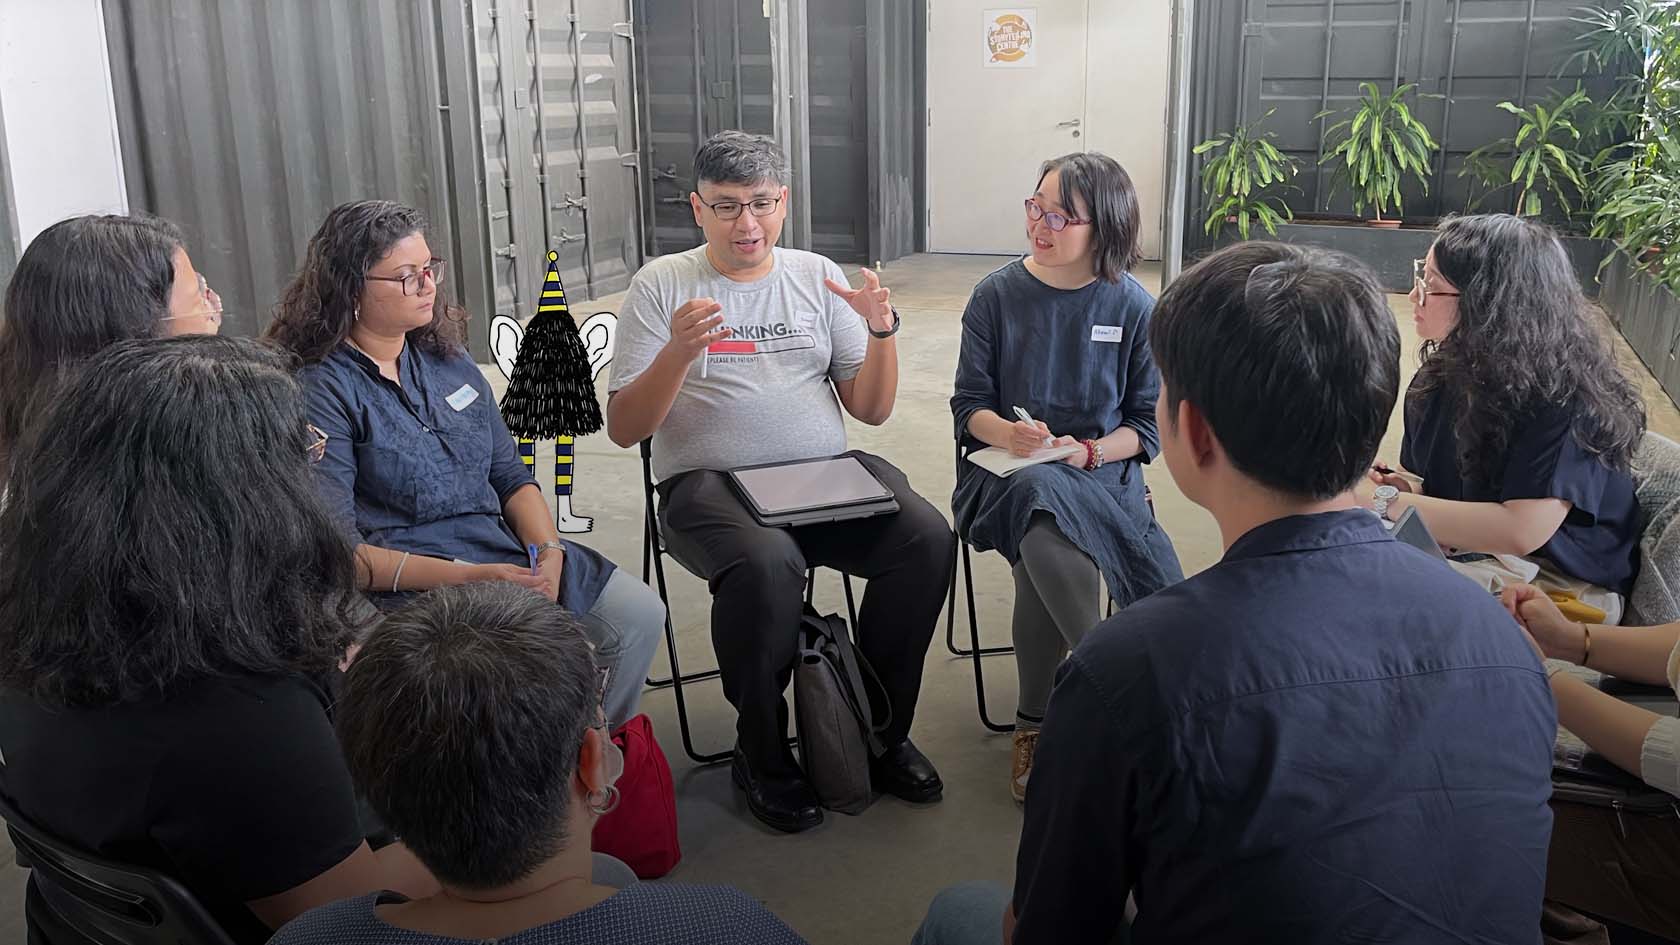 A group of practitioners seated in a circle having a discussion